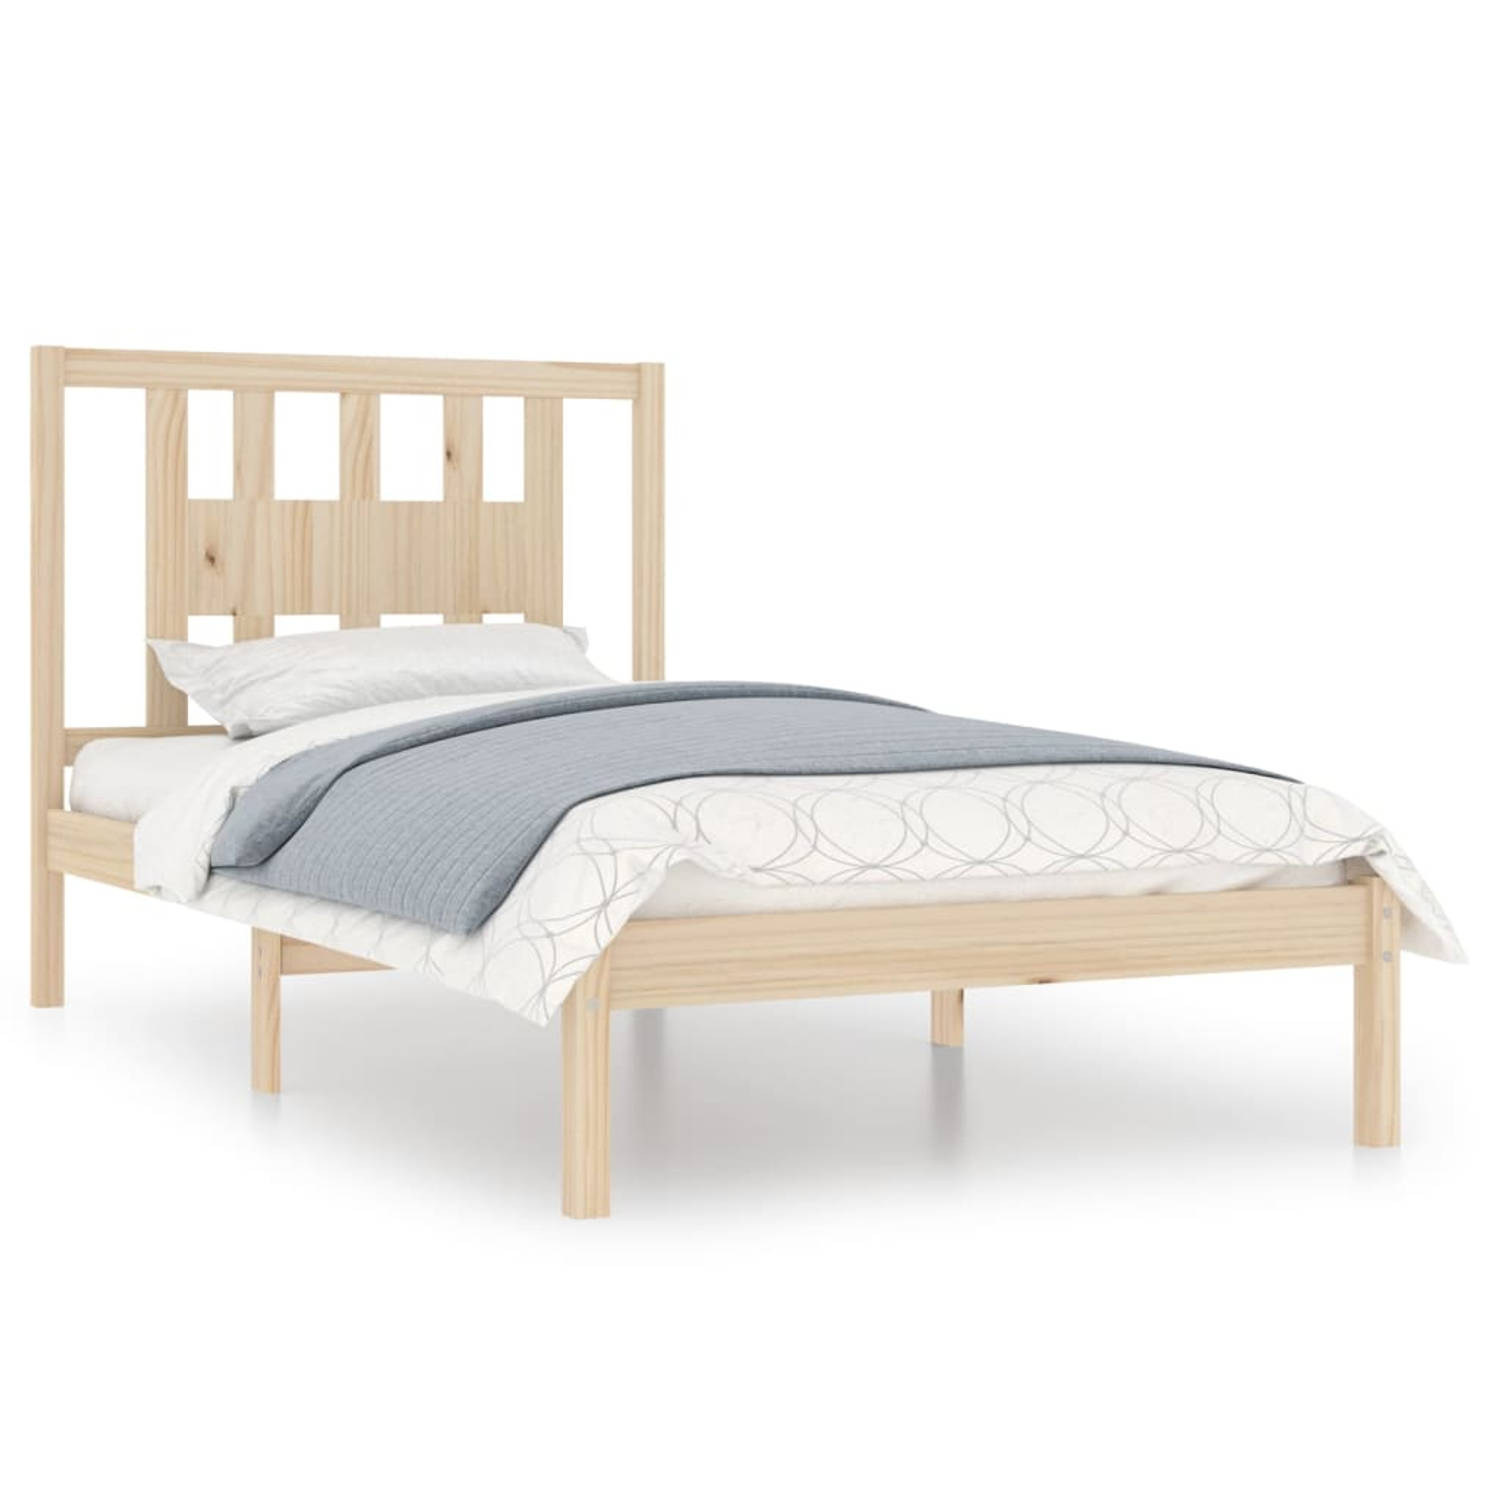 The Living Store Bedframe massief grenenhout 100x200 cm - Bedframe - Bedframes - Eenpersoonsbed - Bed - Bedombouw - Ledikant - Houten Bedframe - Eenpersoonsbedden - Bedden - Bedomb